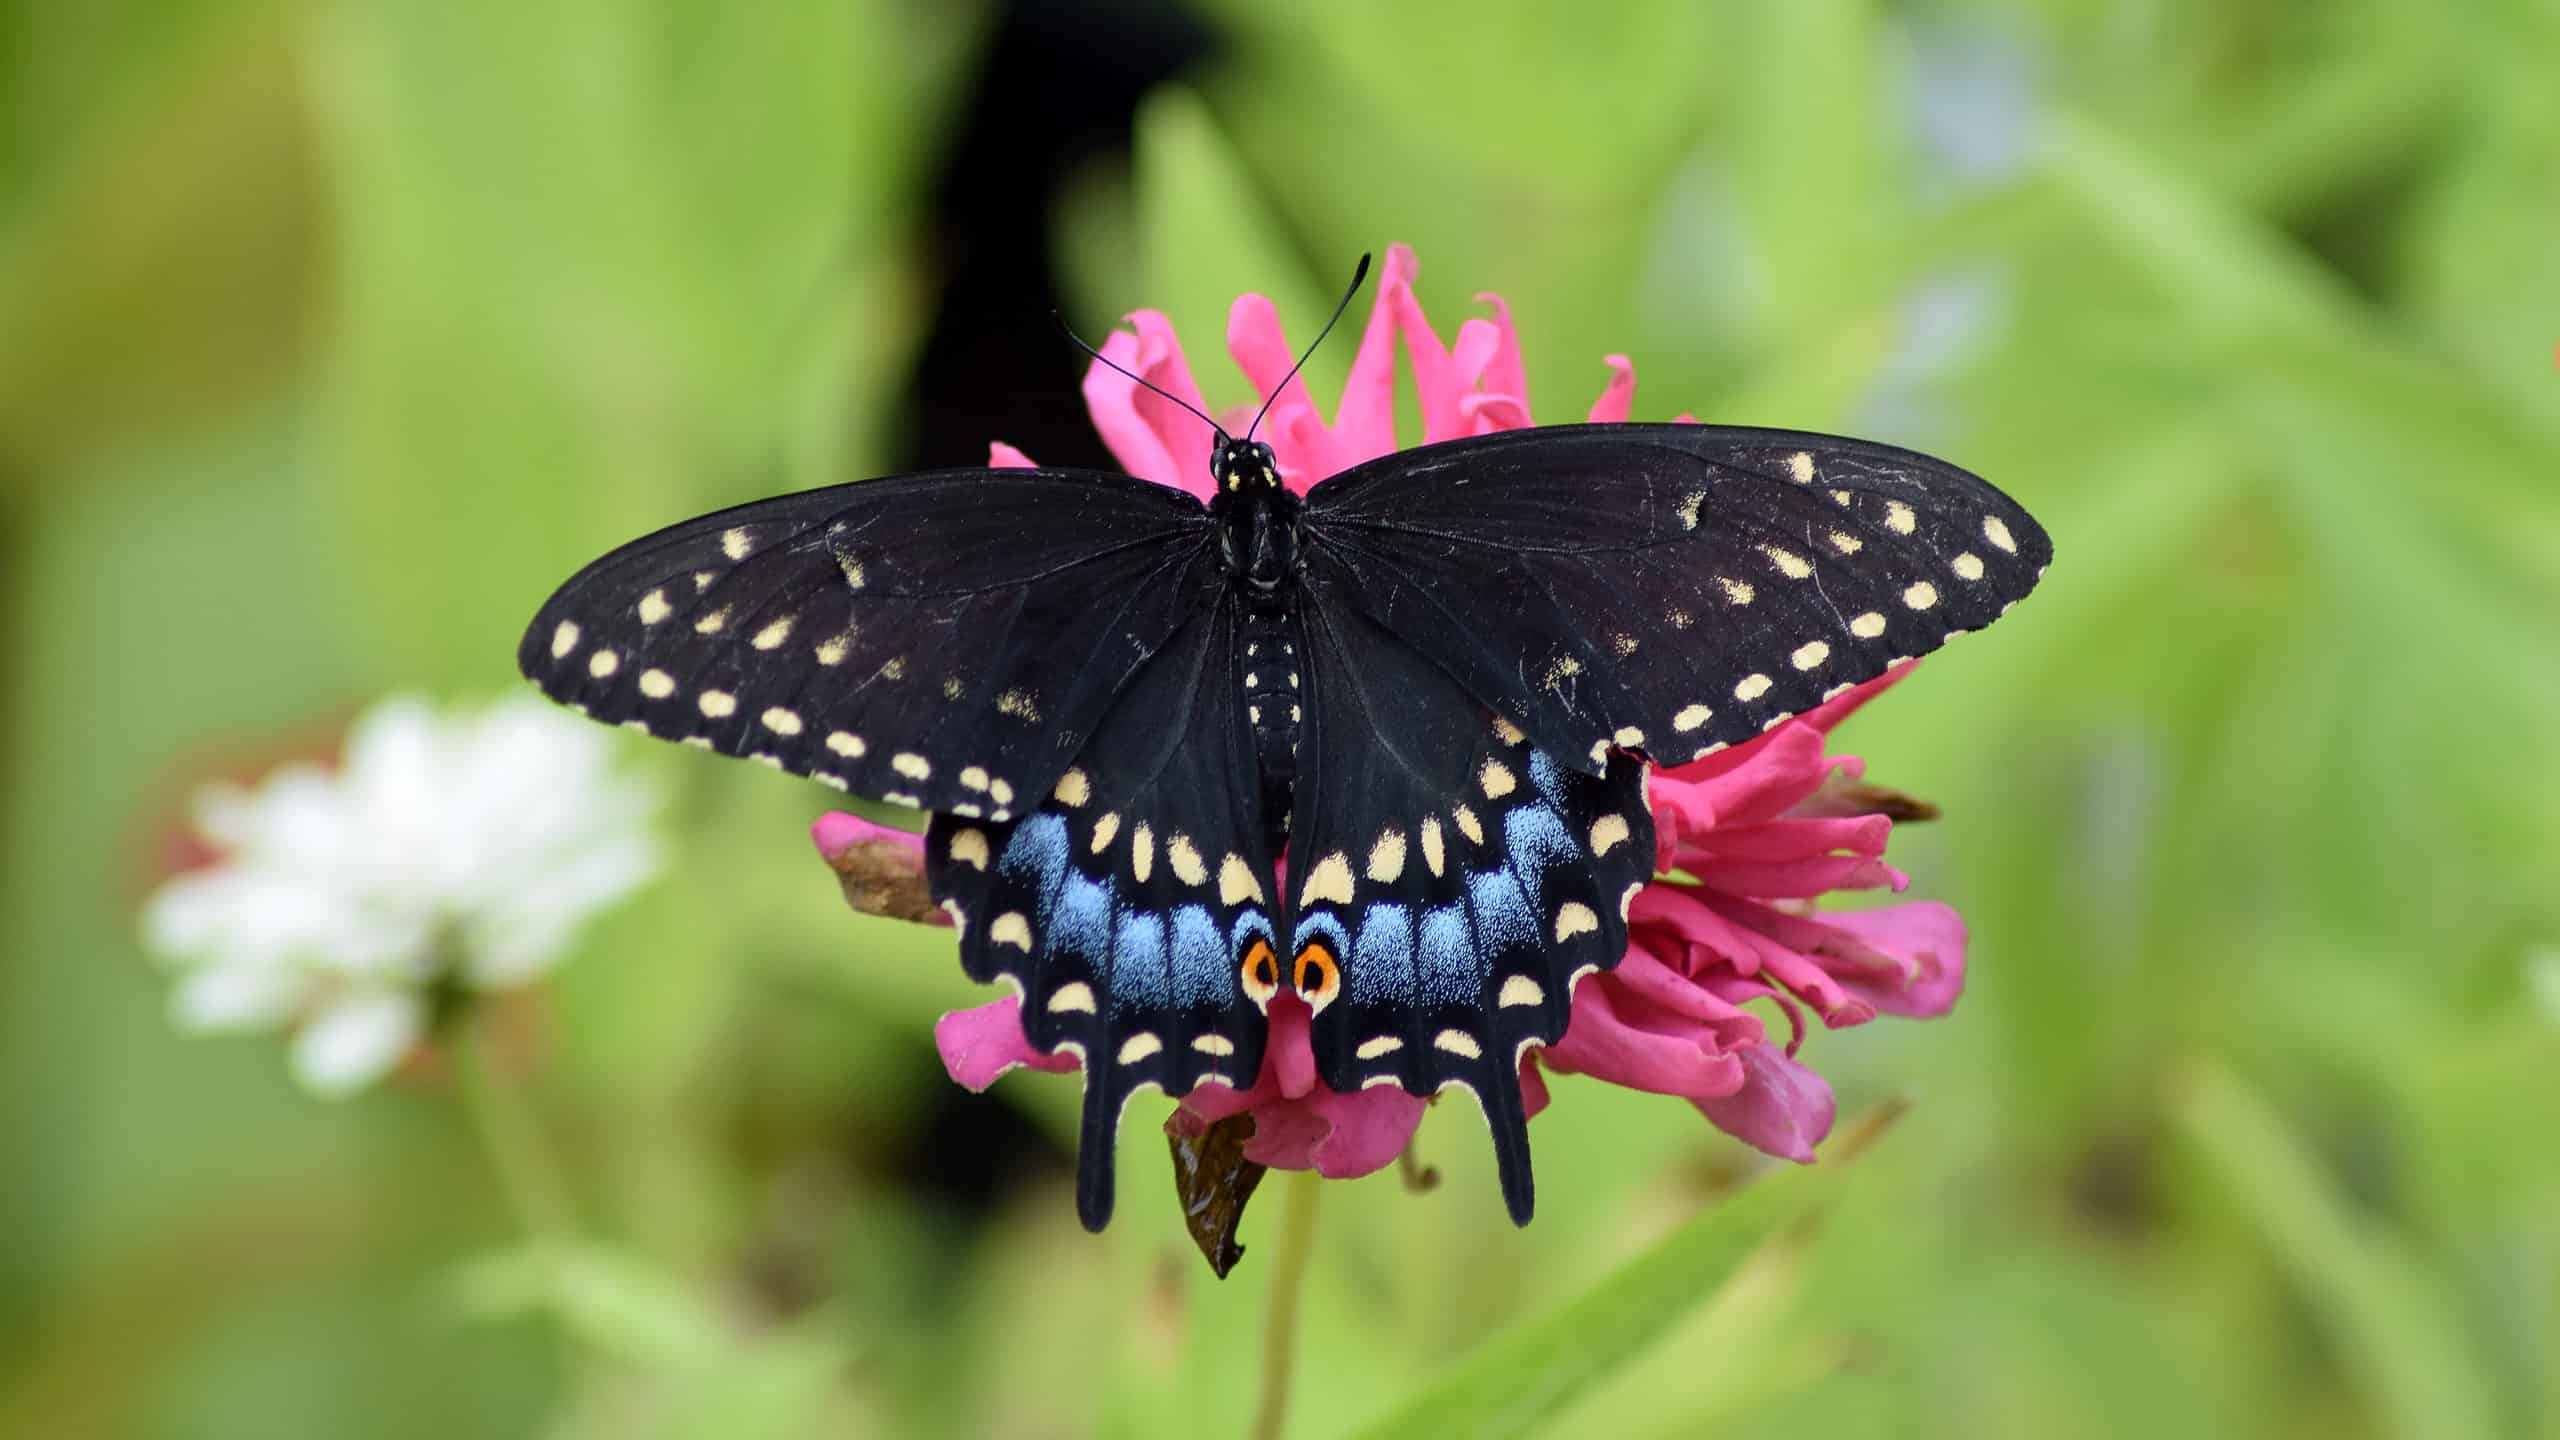 Center frame: A black swallowtail butterfly invisible feeding on a pink flower. The butterfly is rather large and mostly black with some lighter marking odf louth yellow and blue on ithe edges of its tail and wings. The background consists of out-of-focus greenery.